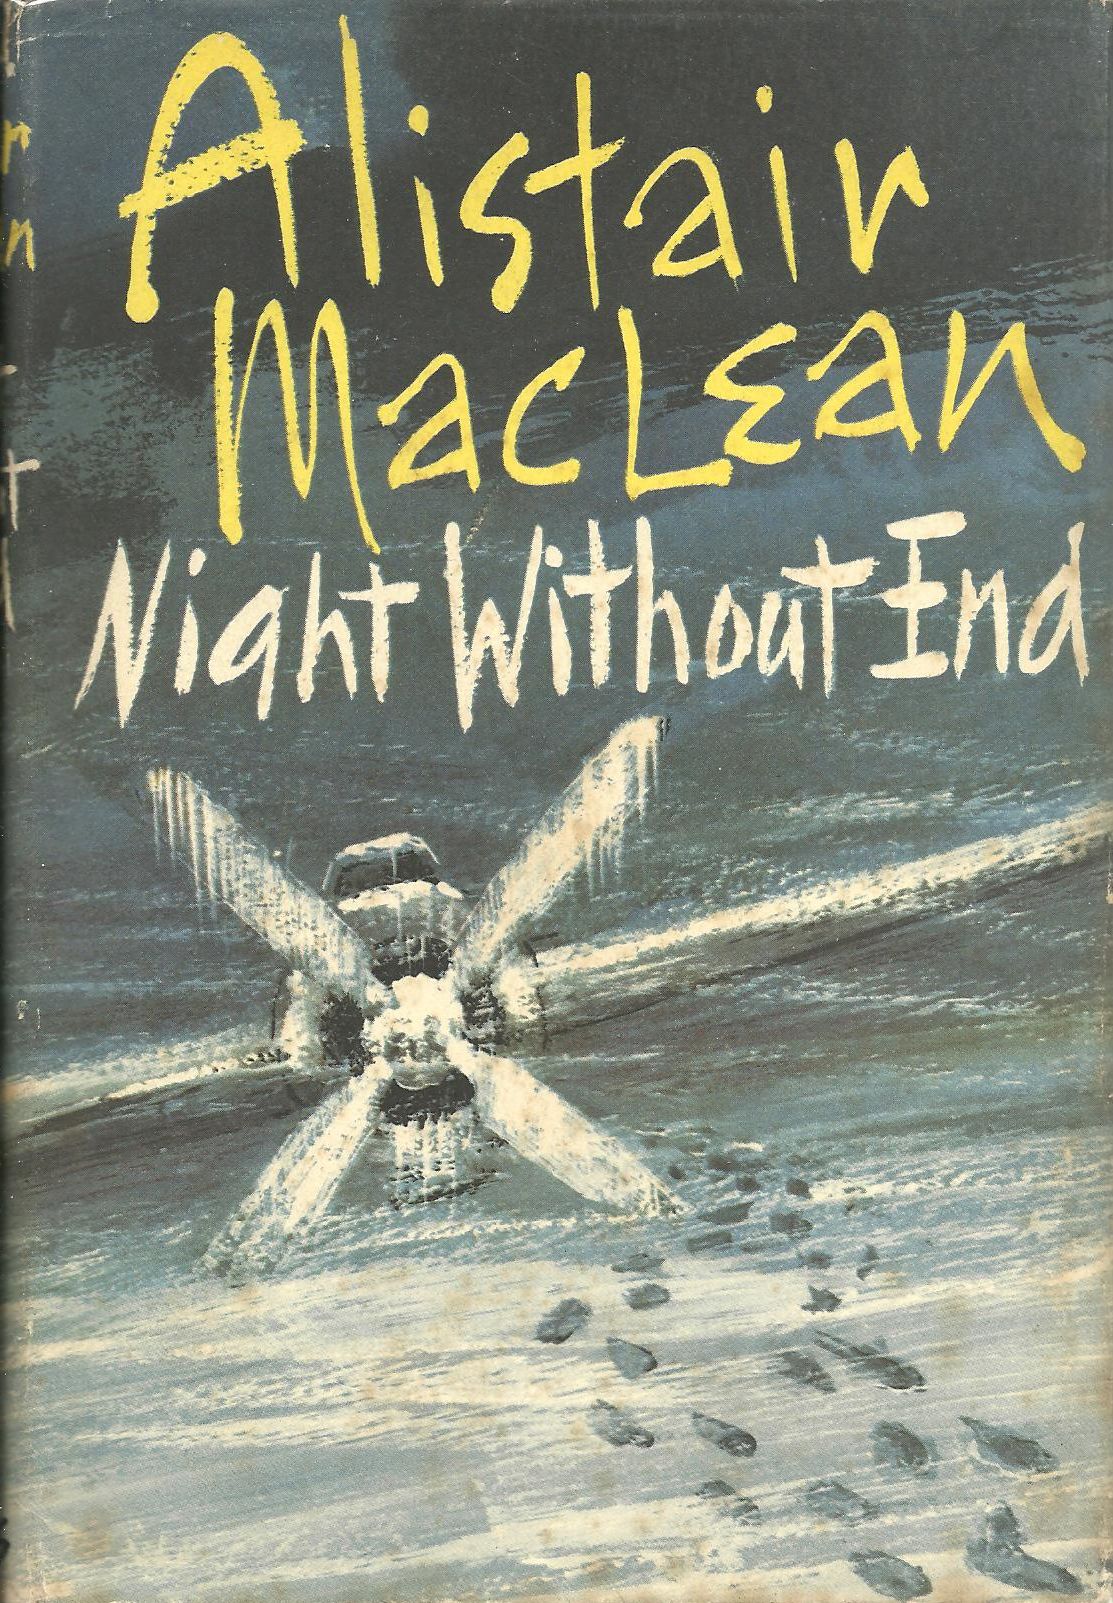 Night Without End - UK first edition